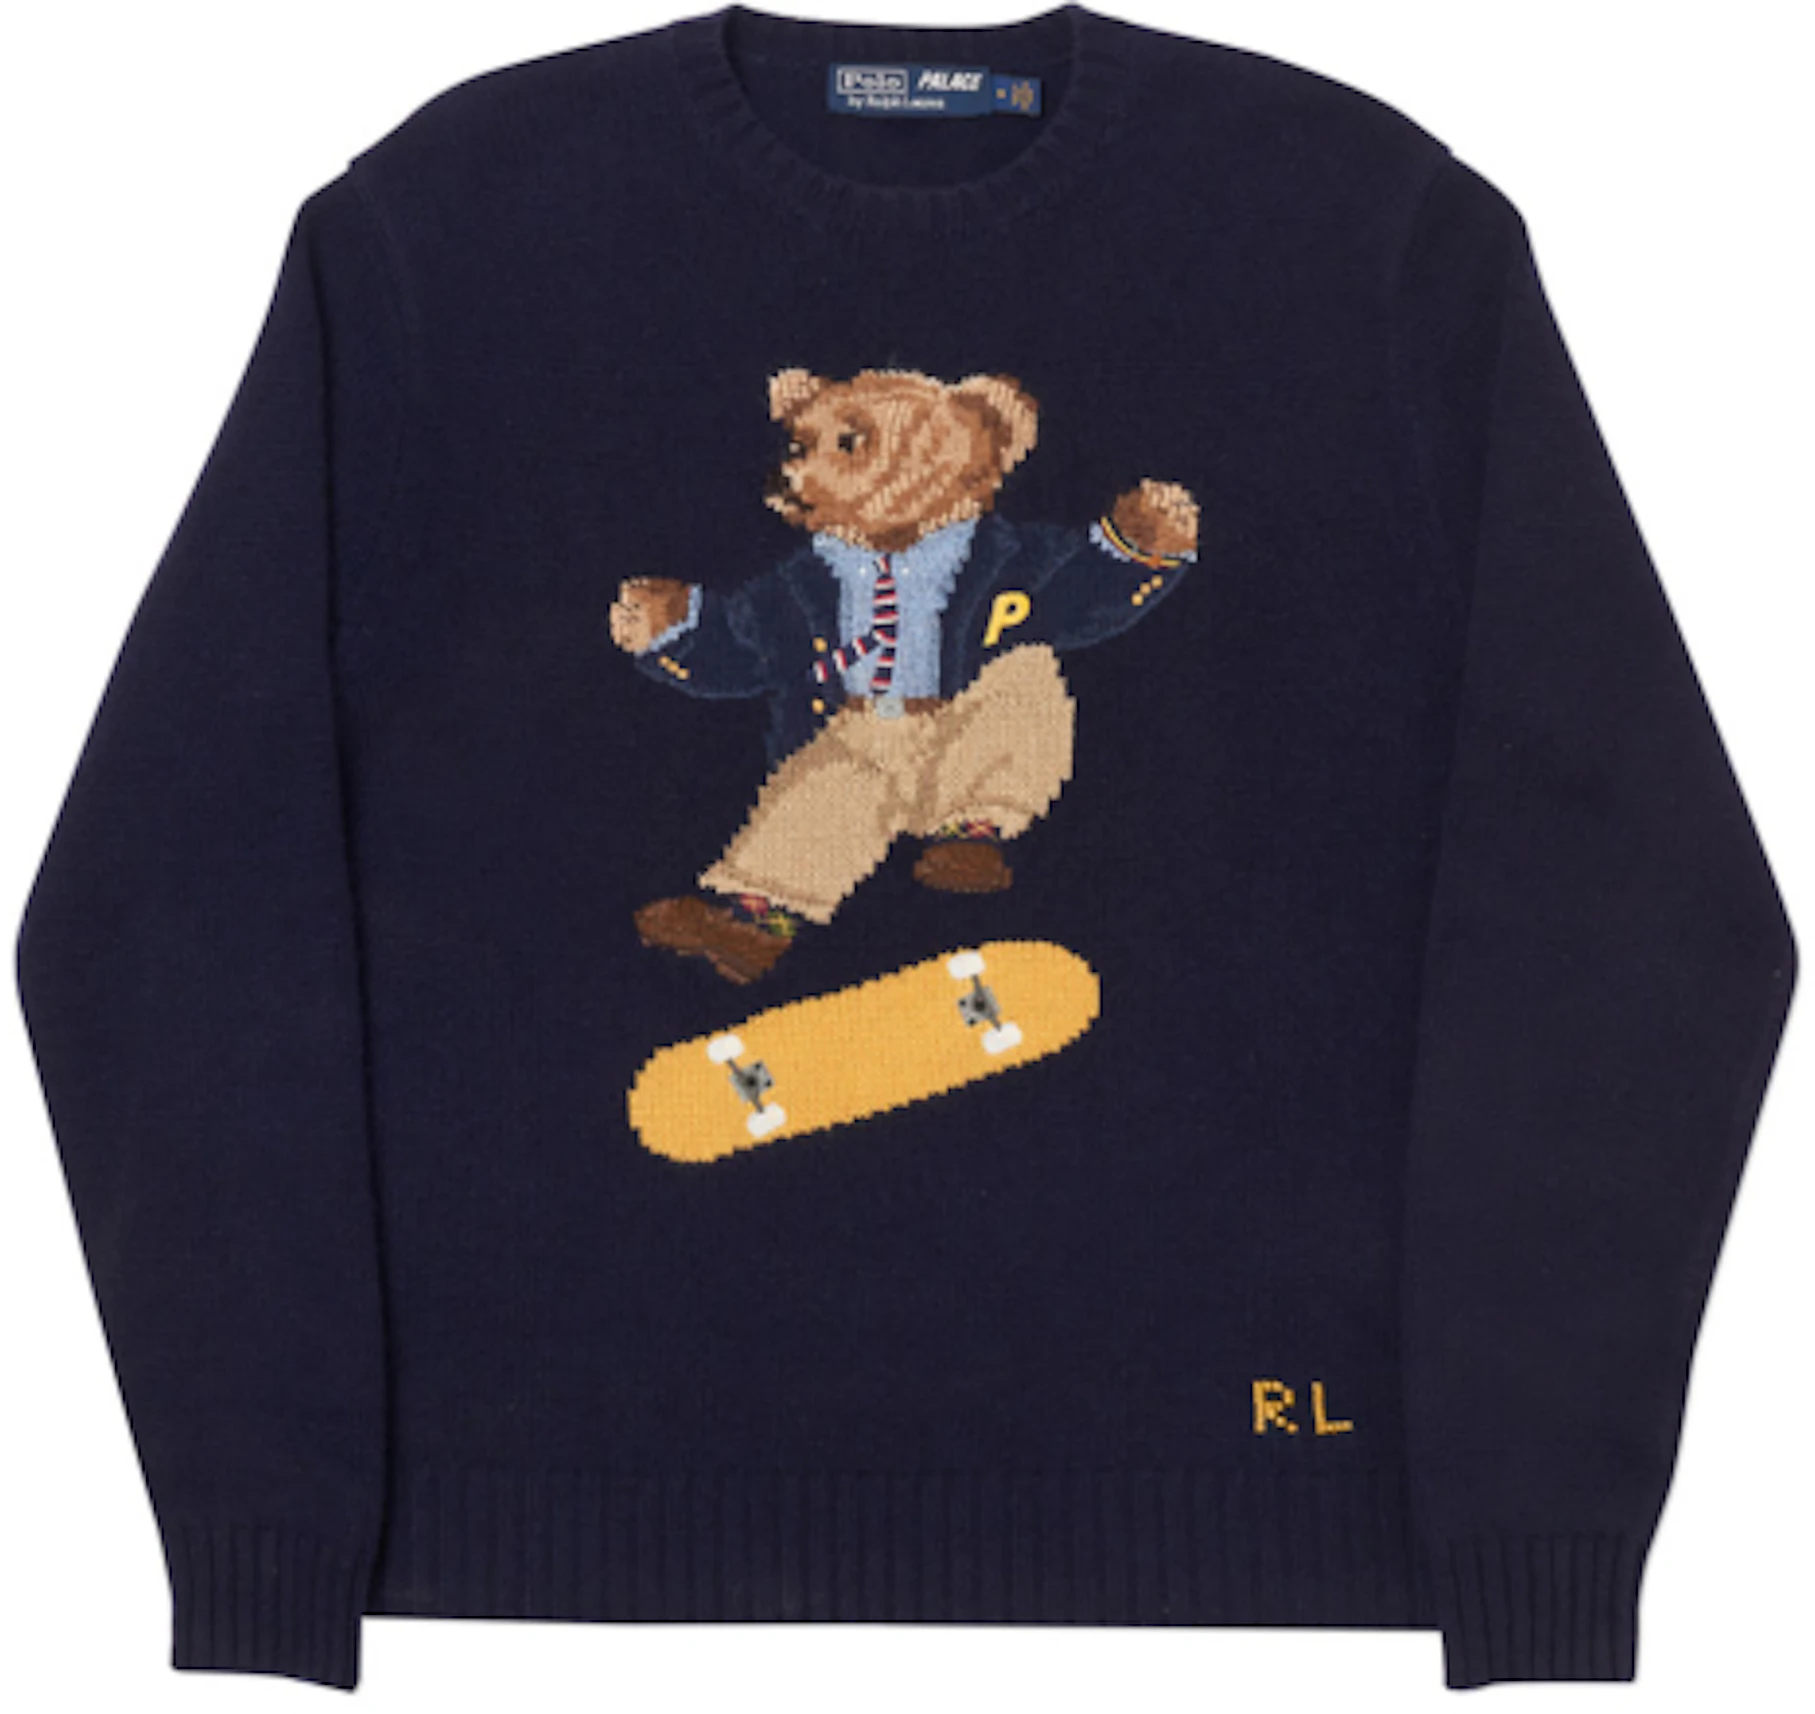 The Iconic Polo Bear Sweater | lupon.gov.ph